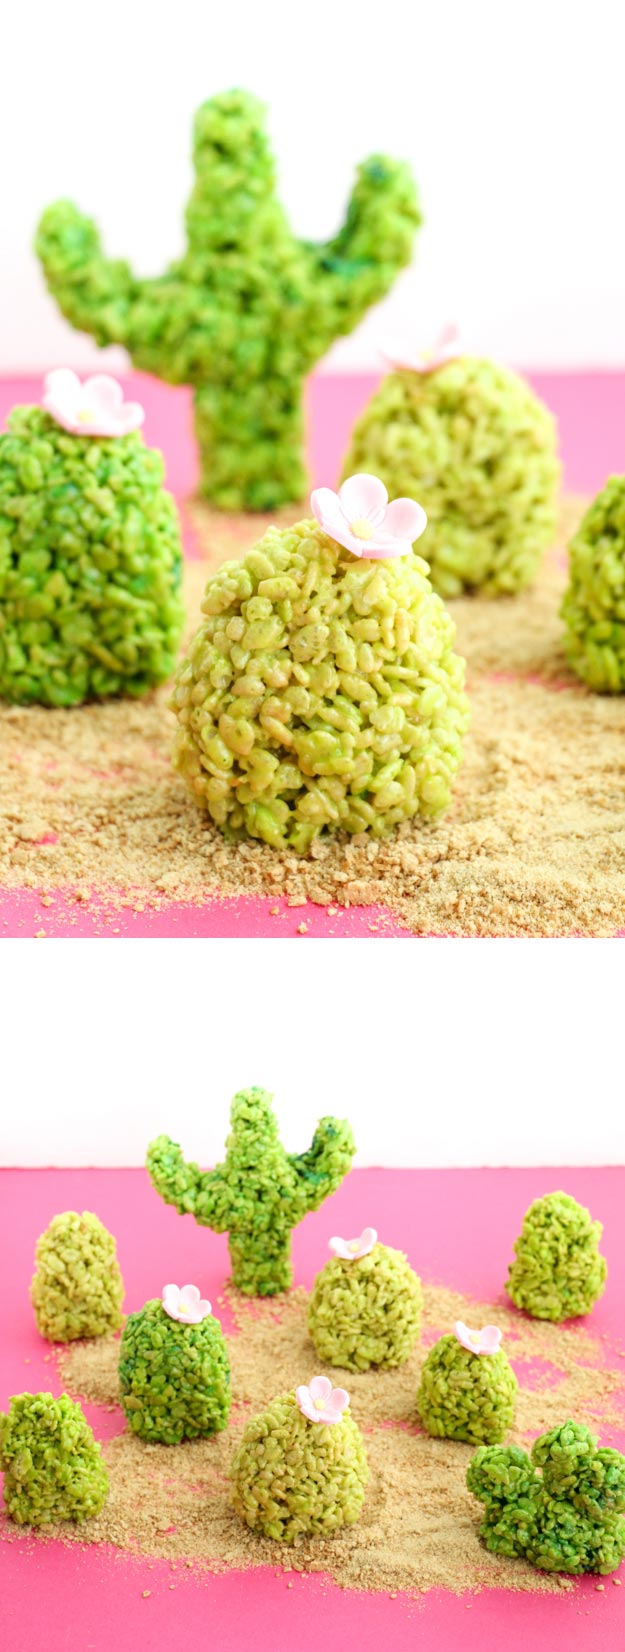 Easy Cactus Craft - Cactus Rice Crispy Treats - Homemade Cactus Party Idea - Cactus Craft for Room - Crafts to do With Kids - Cute and Easy Crafts - Quick Crafts to Make at Home #diycrafts #makeandsell #cactusdecor